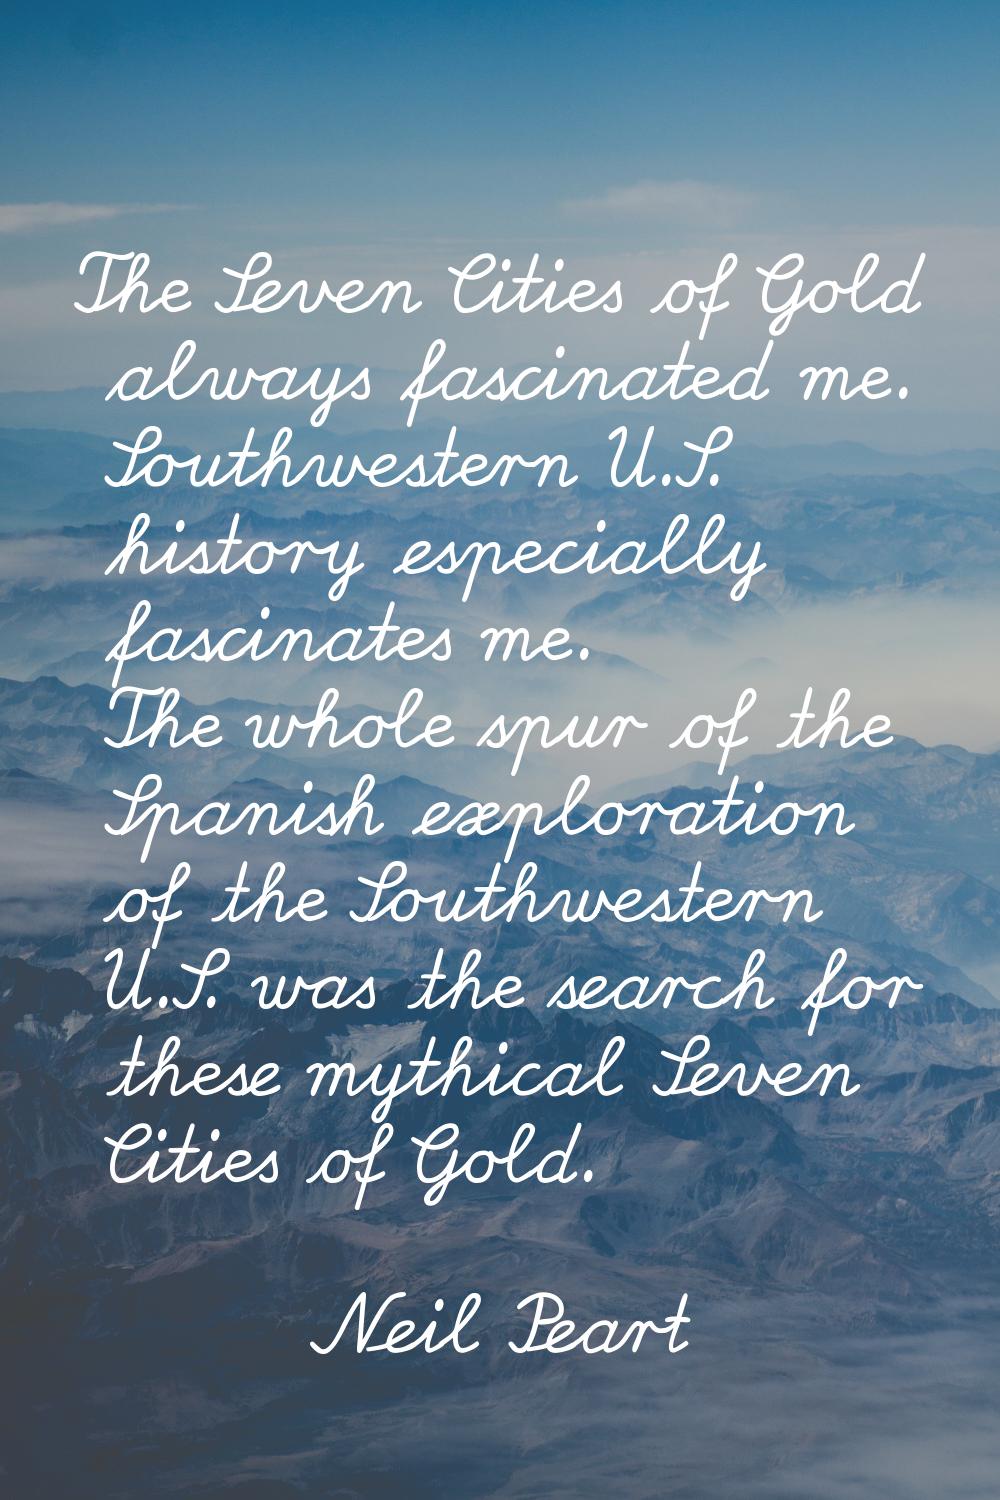 The Seven Cities of Gold always fascinated me. Southwestern U.S. history especially fascinates me. 